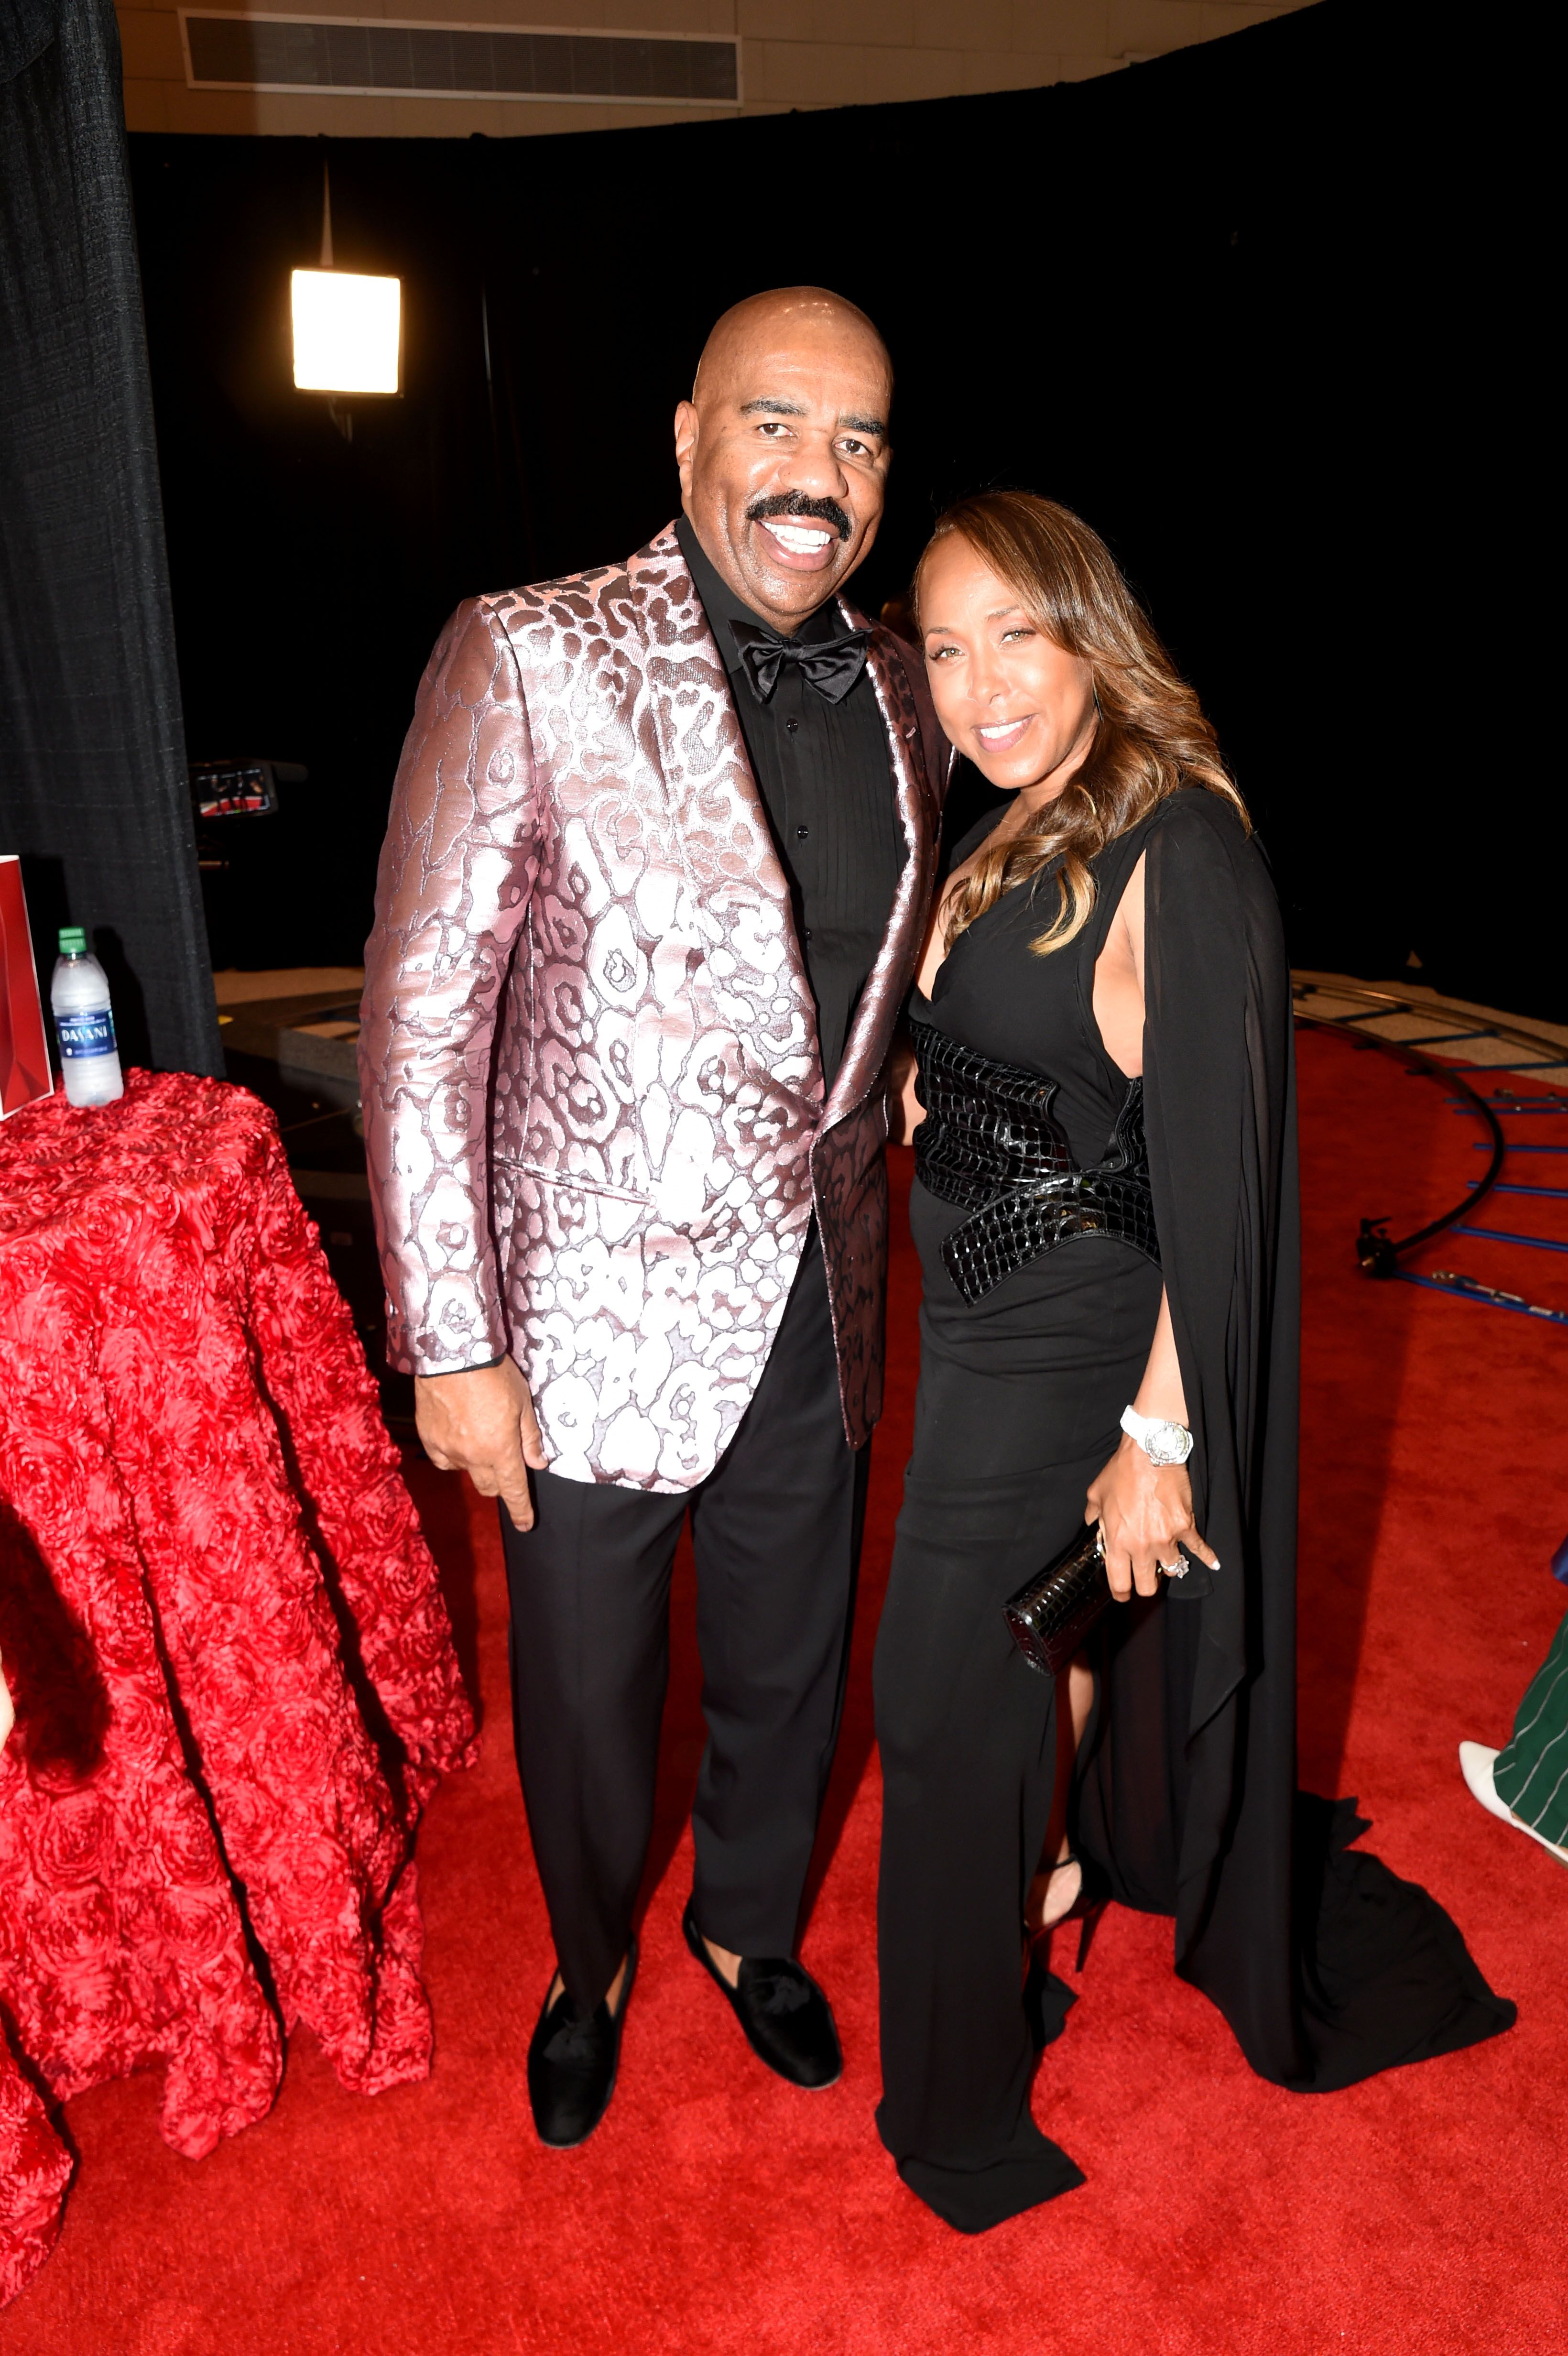 Steve and Marjorie Harvey backstage at the "Steve Harvey Show" in 2019/ Source: Getty Images